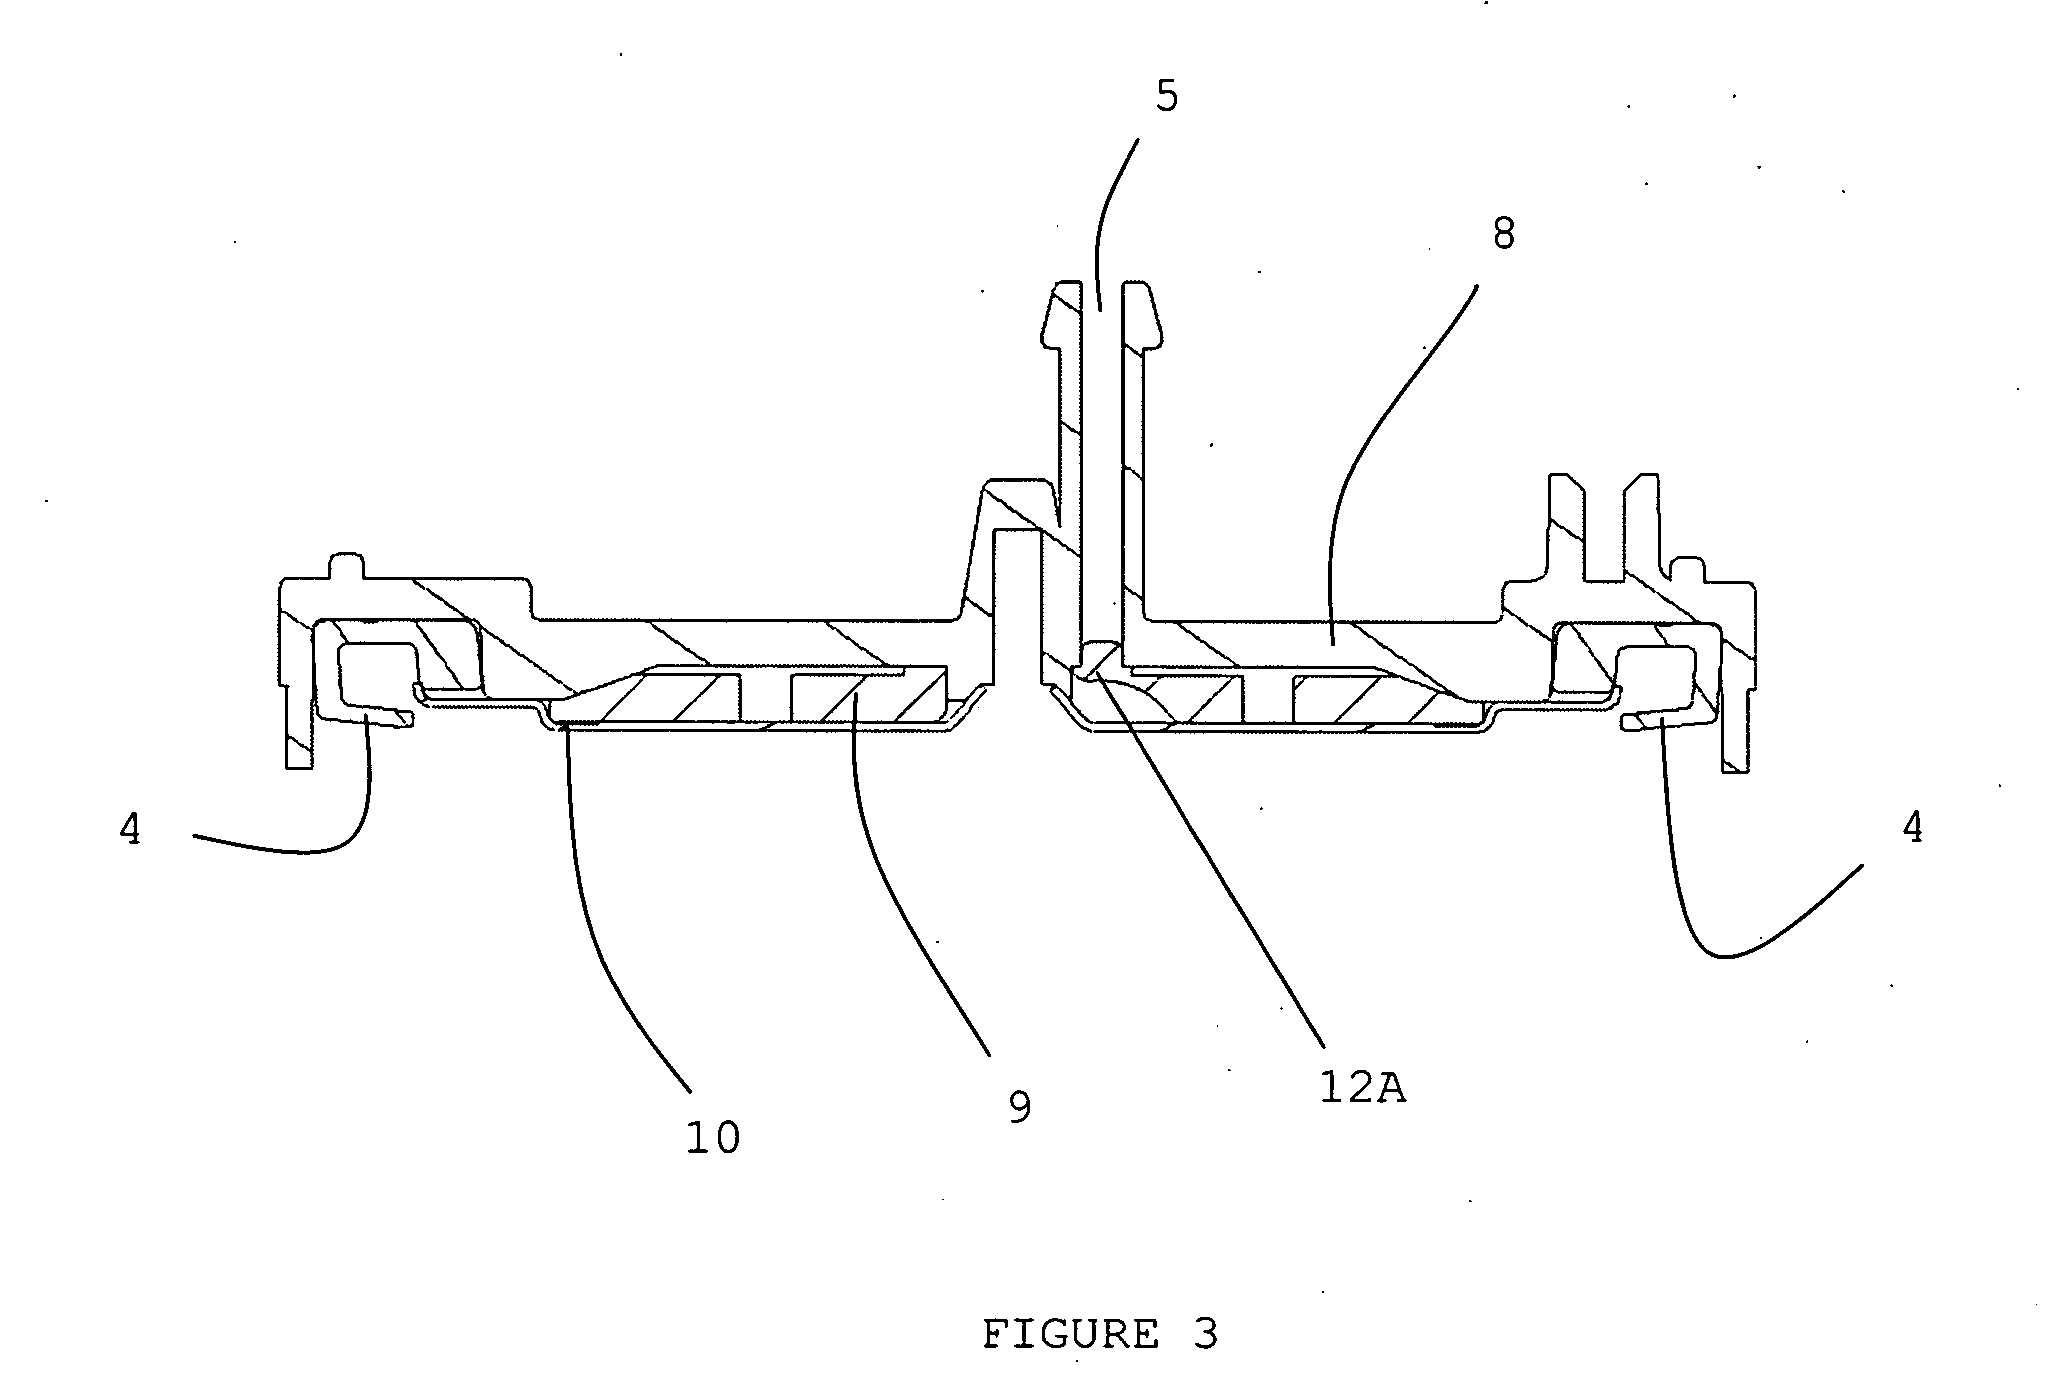 Apparatus for preventing unintended or premature release of liquid in a beverage brewing device and method thereof